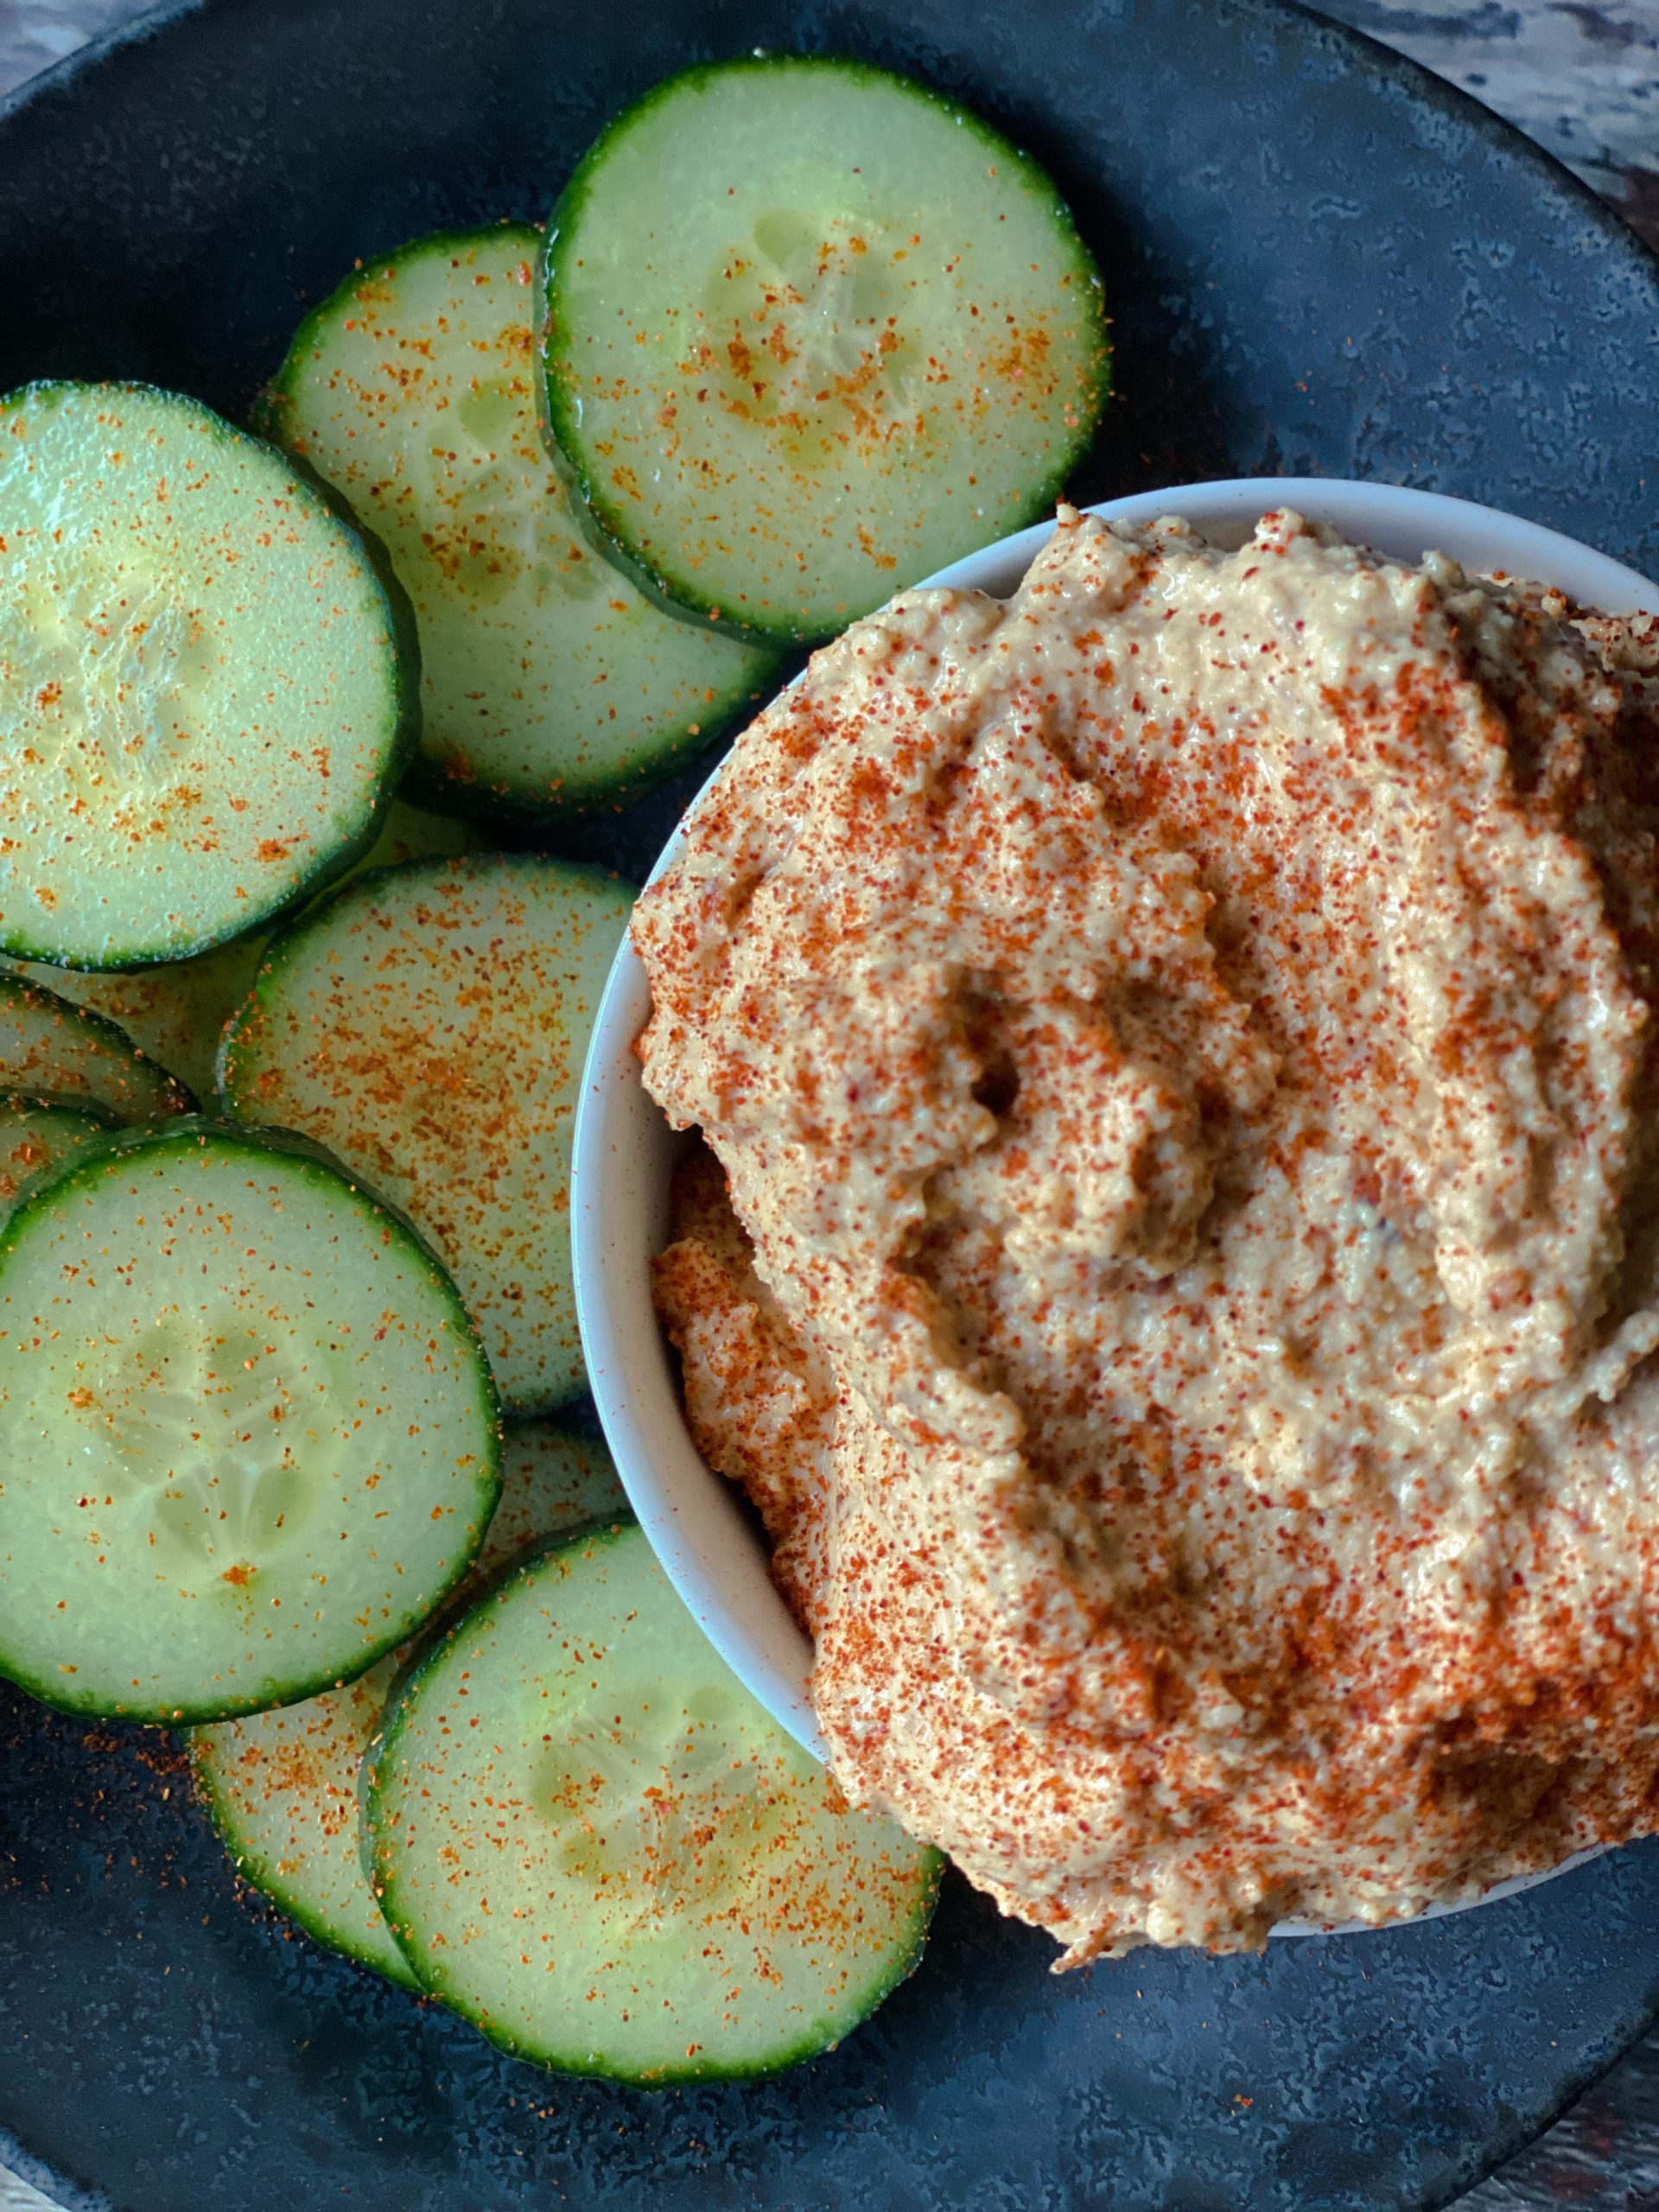 dish of bitchin sauce on a plate with sliced cucumbers and sprinkled with smoked paprika